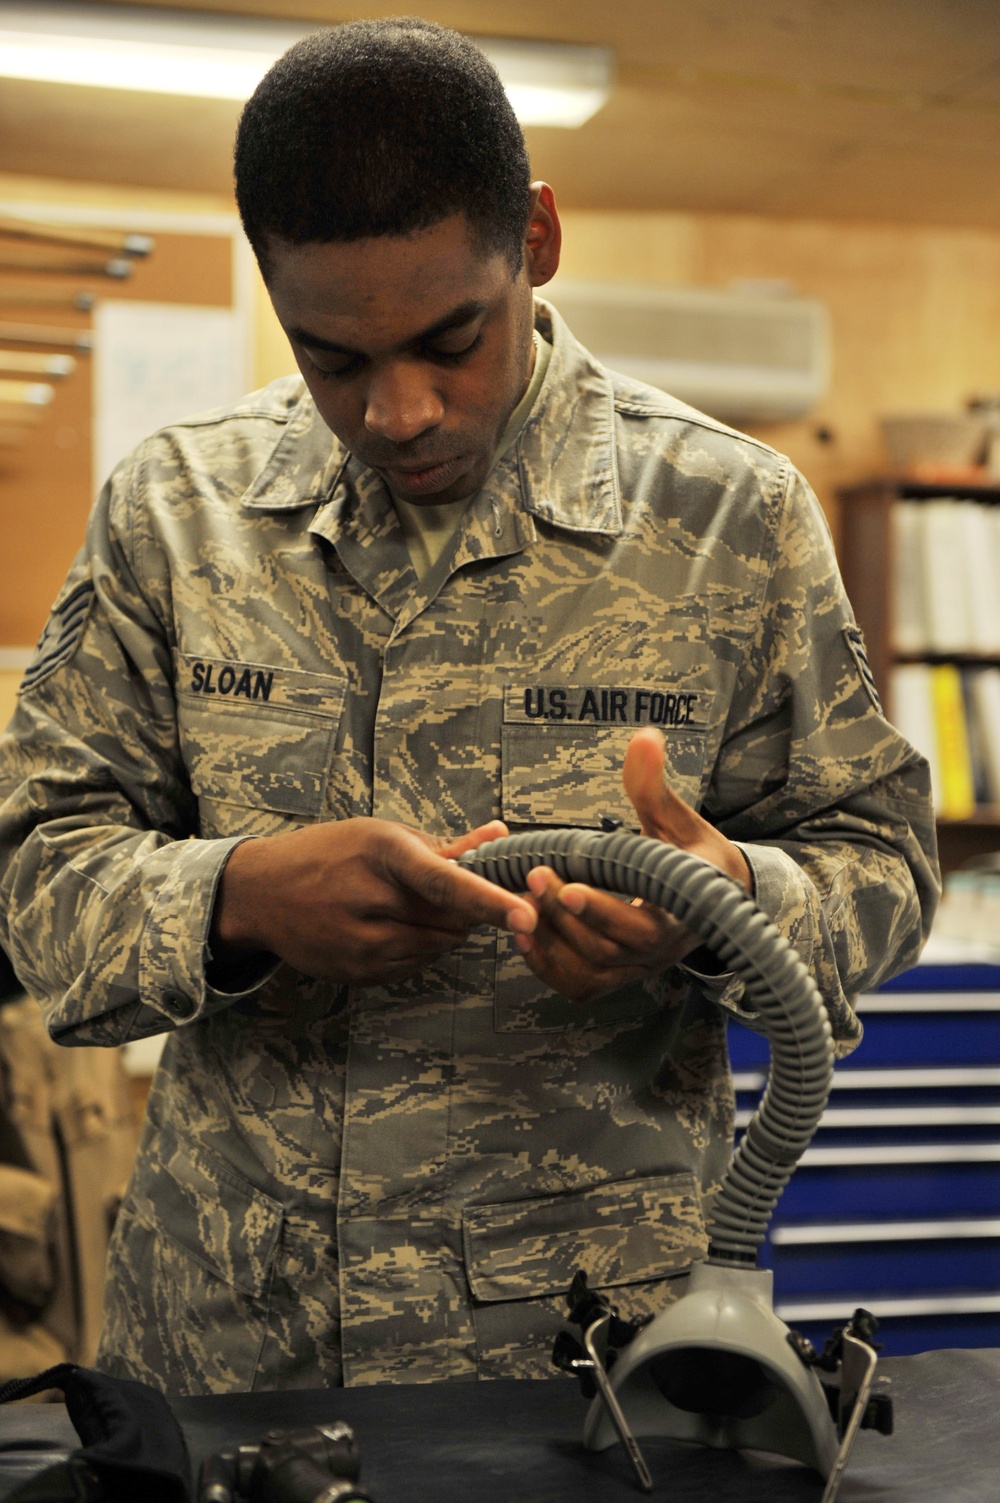 Mobility Airman profile: Savannah Guard NCO manages life support efforts at Afghanistan base